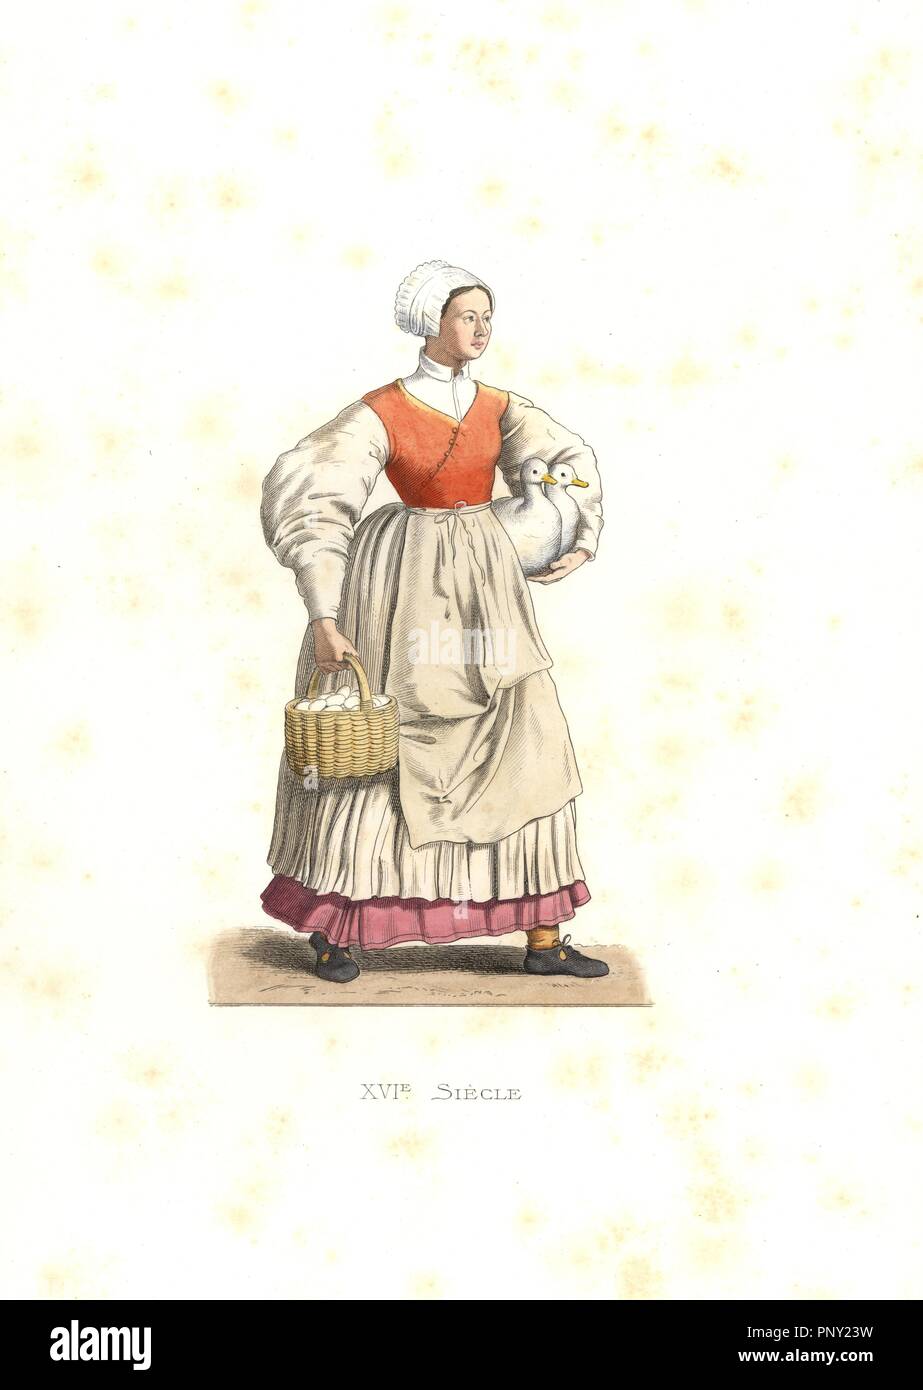 Peasant woman of France, 16th century. Handcolored illustration by E. Lechevallier-Chevignard, lithographed by A. Didier, L. Flameng, F. Laguillermie, from Georges Duplessis's 'Costumes historiques des XVIe, XVIIe et XVIIIe siecles' (Historical costumes of the 16th, 17th and 18th centuries), Paris 1867. The book was a continuation of the series on the costumes of the 12th to 15th centuries published by Camille Bonnard and Paul Mercuri from 1830. Georges Duplessis (1834-1899) was curator of the Prints department at the Bibliotheque nationale. Edmond Lechevallier-Chevignard (1825-1902) was an ar Stock Photo